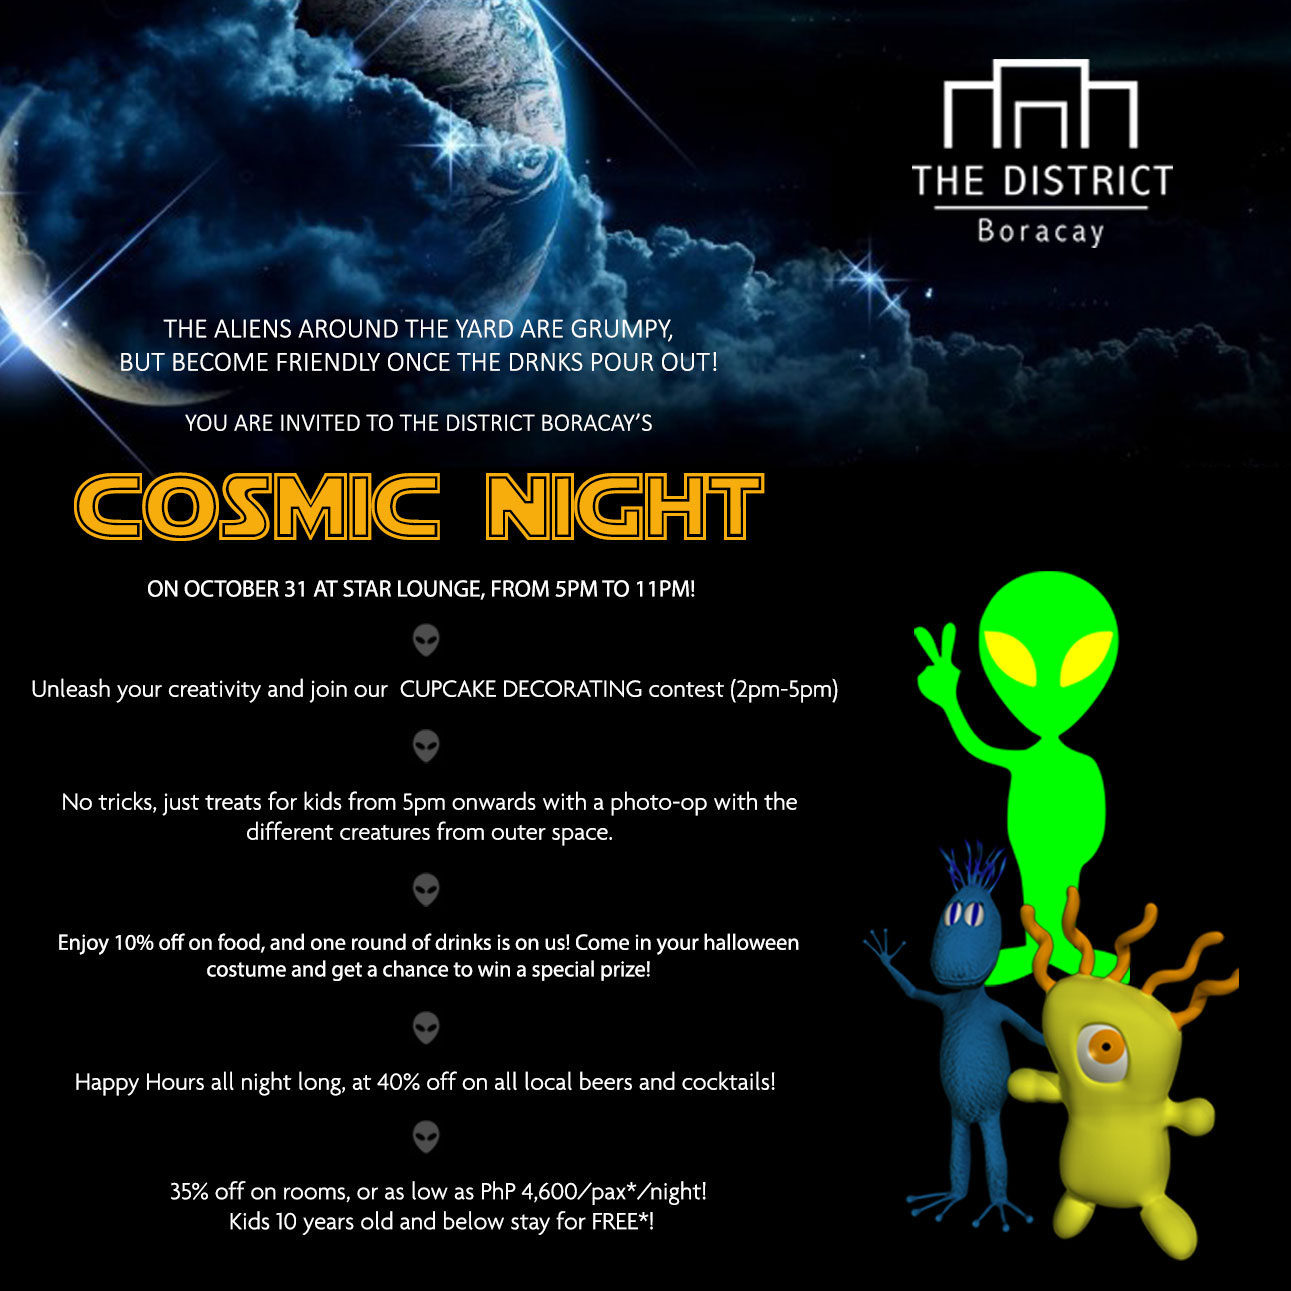 Cosmic Night at The District Boracay